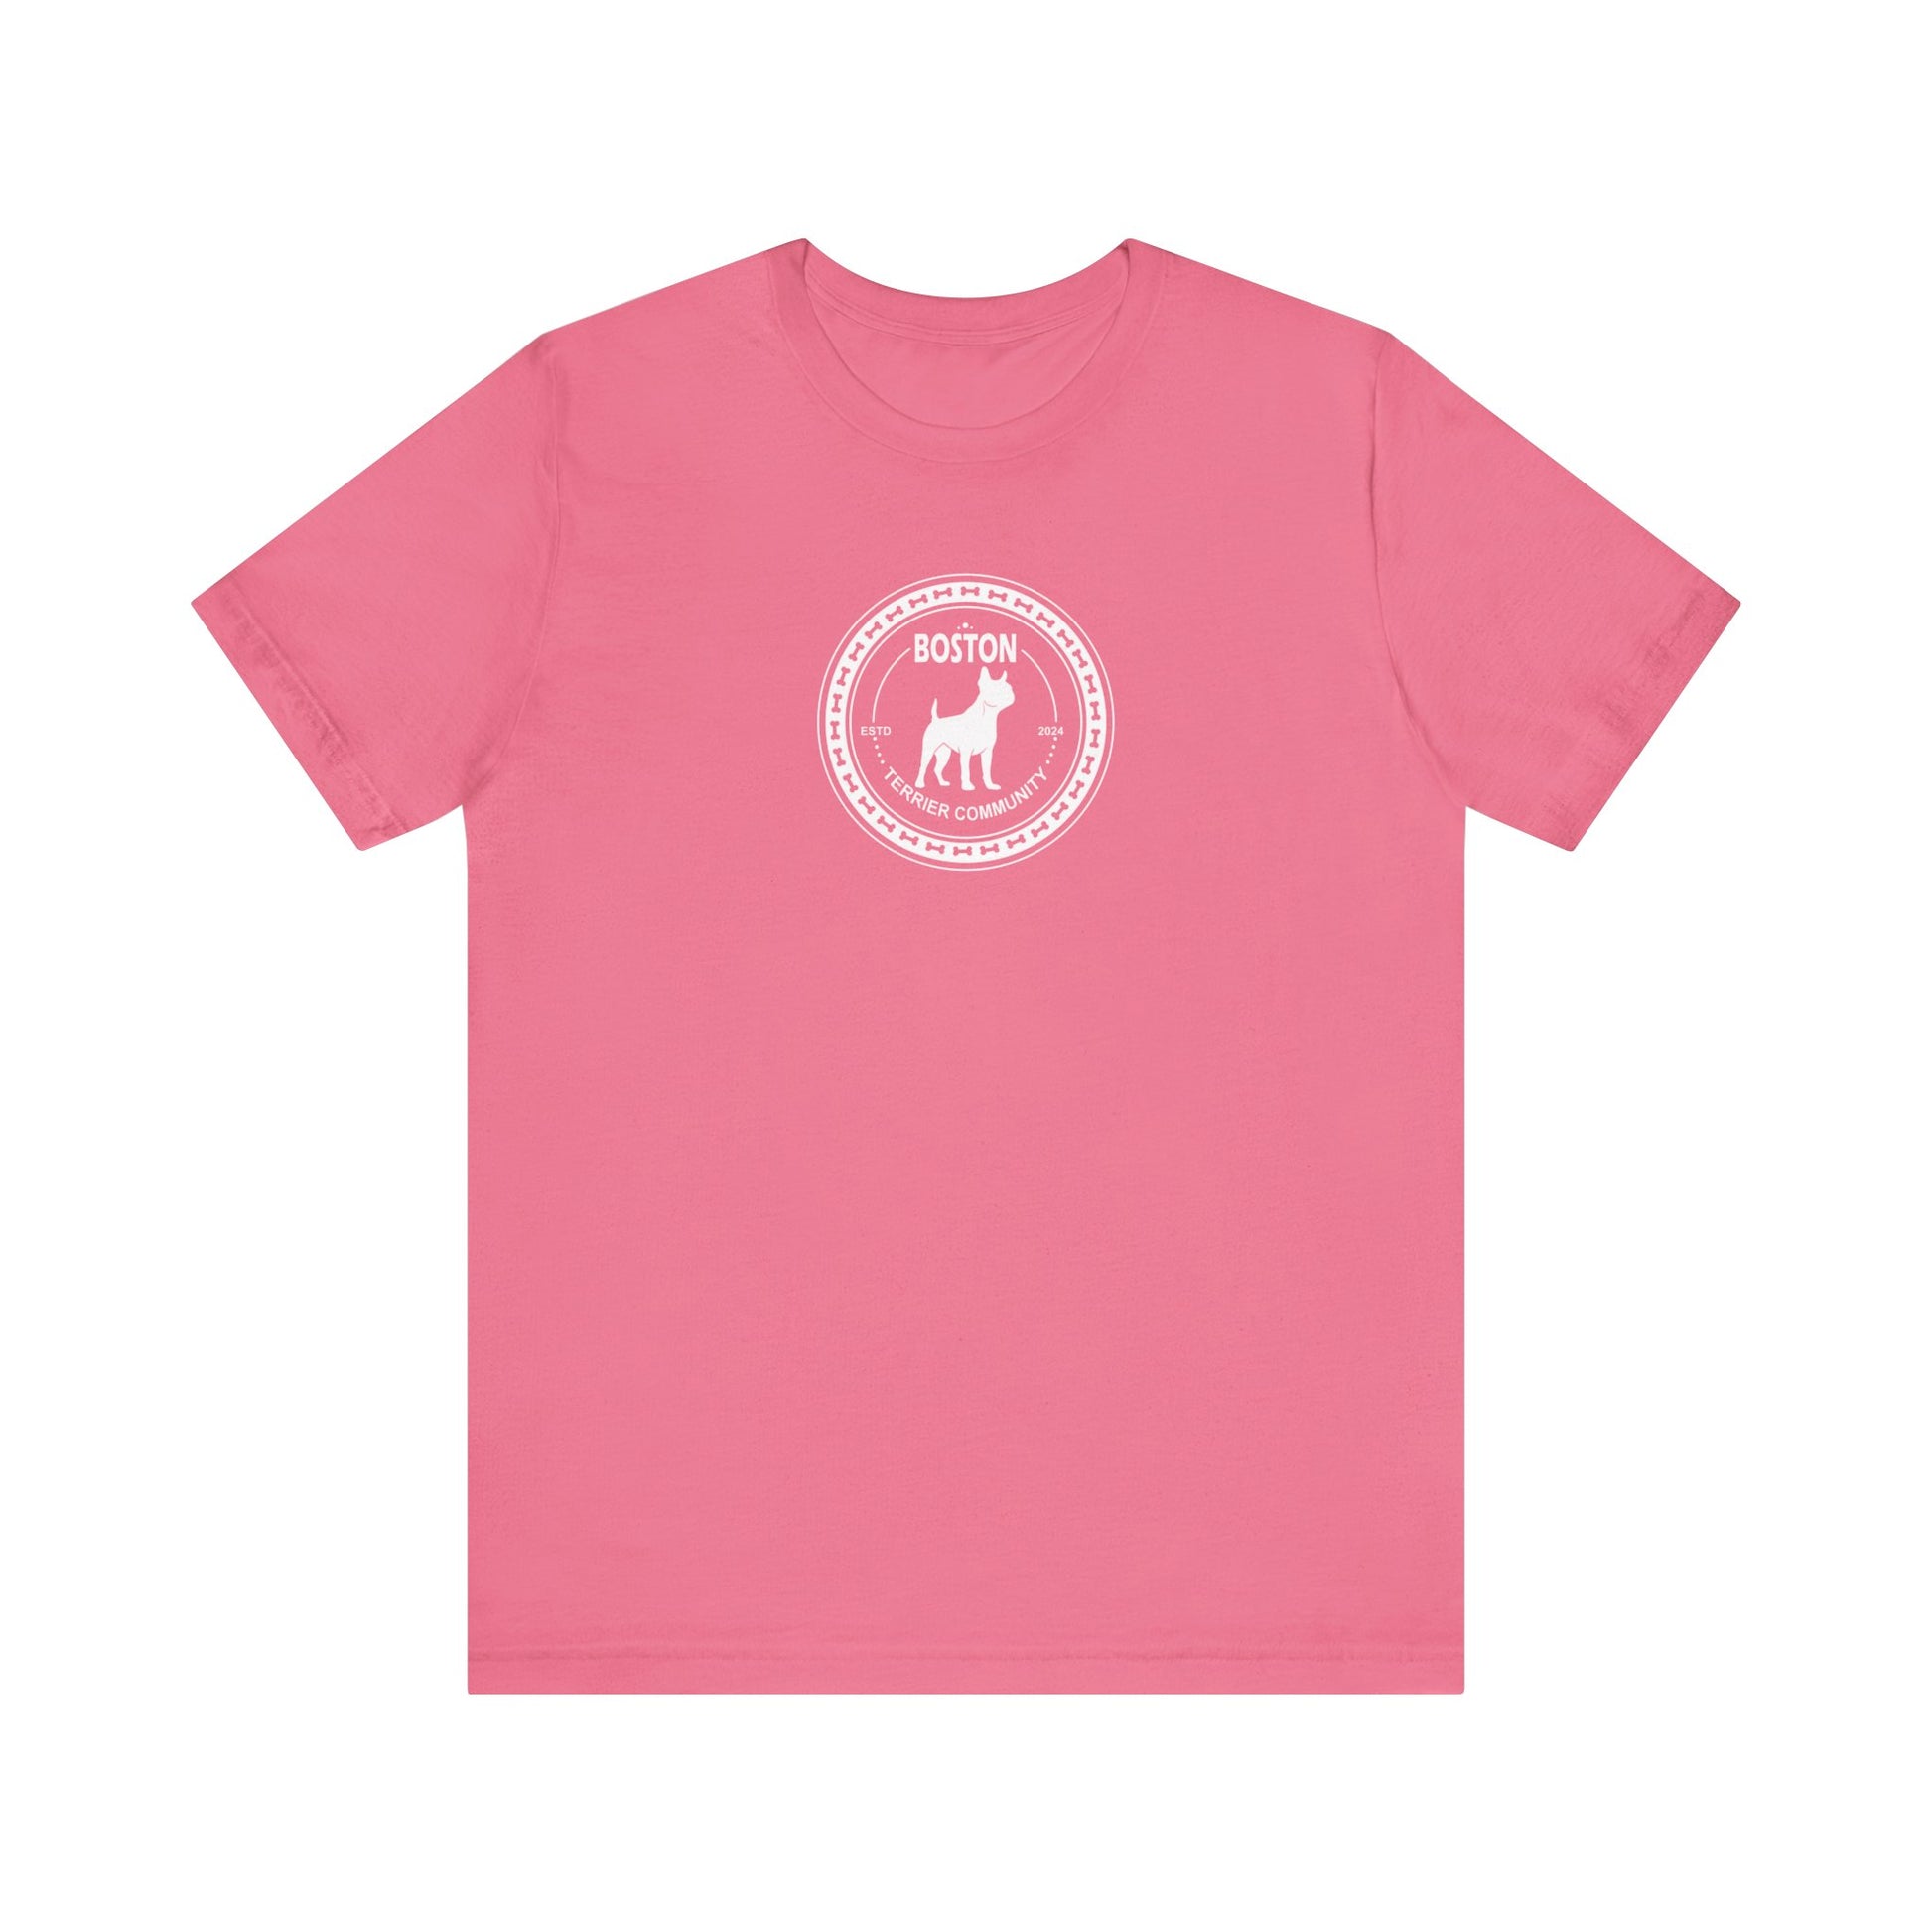 Boston Terrier T-shirt color pink with dog lover logo